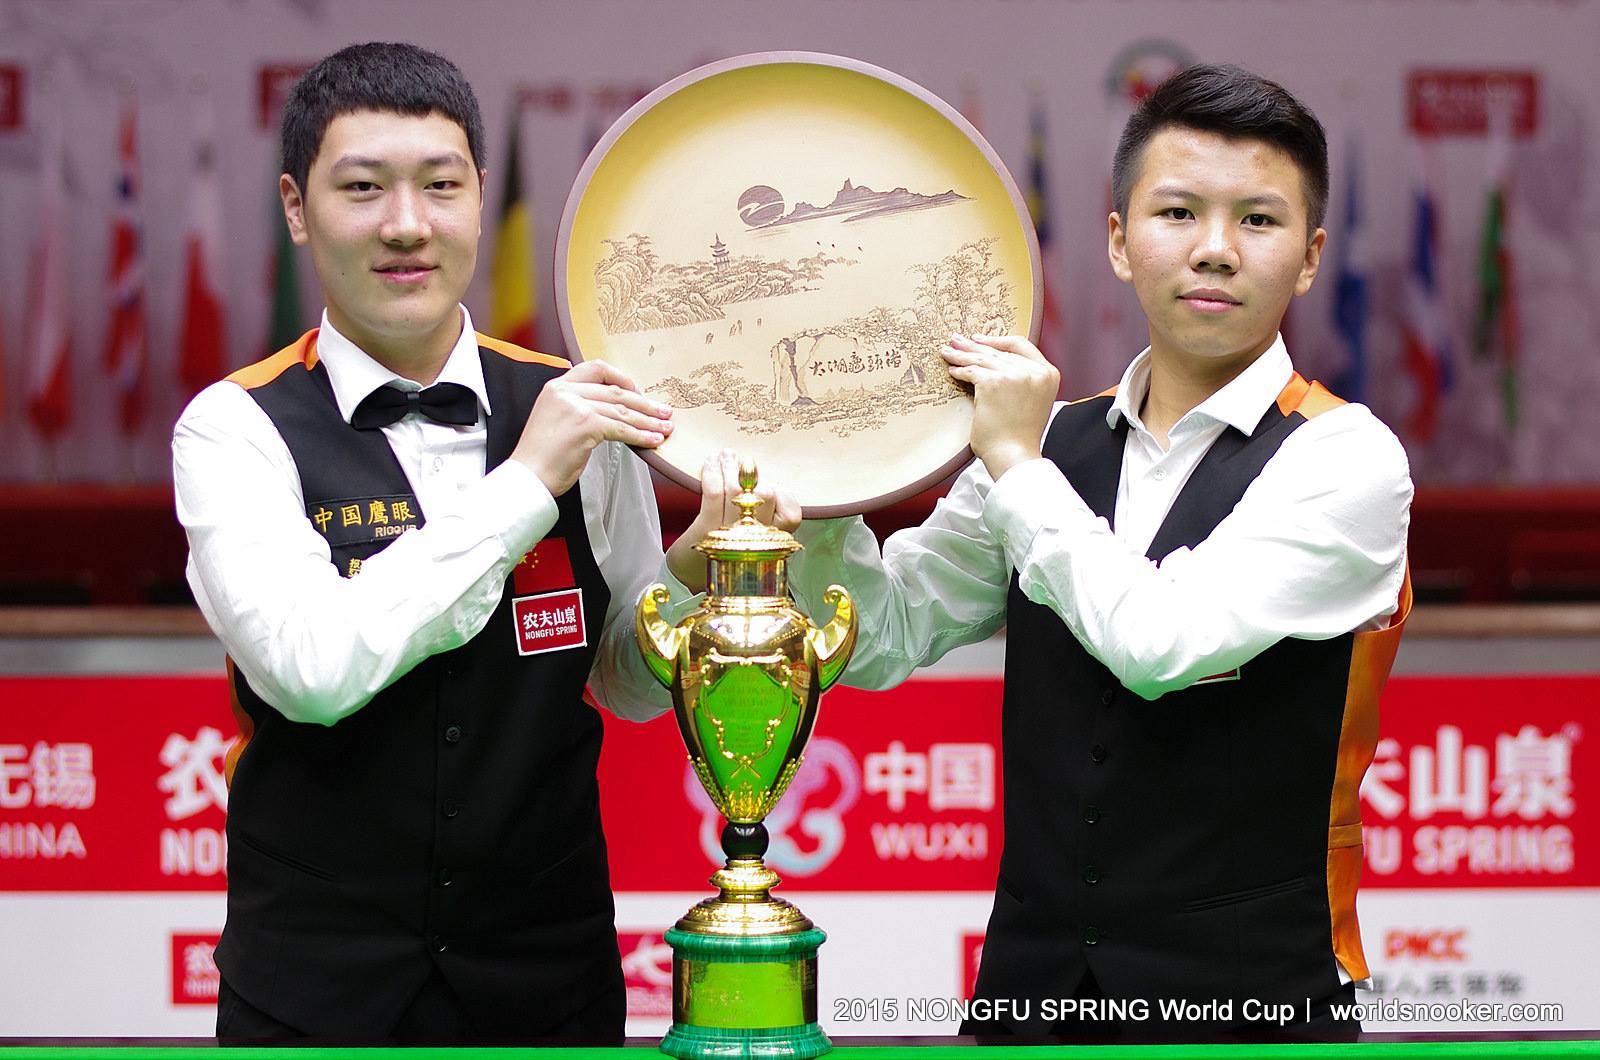 China B Storm To Victory At The Snooker World Cup 2015